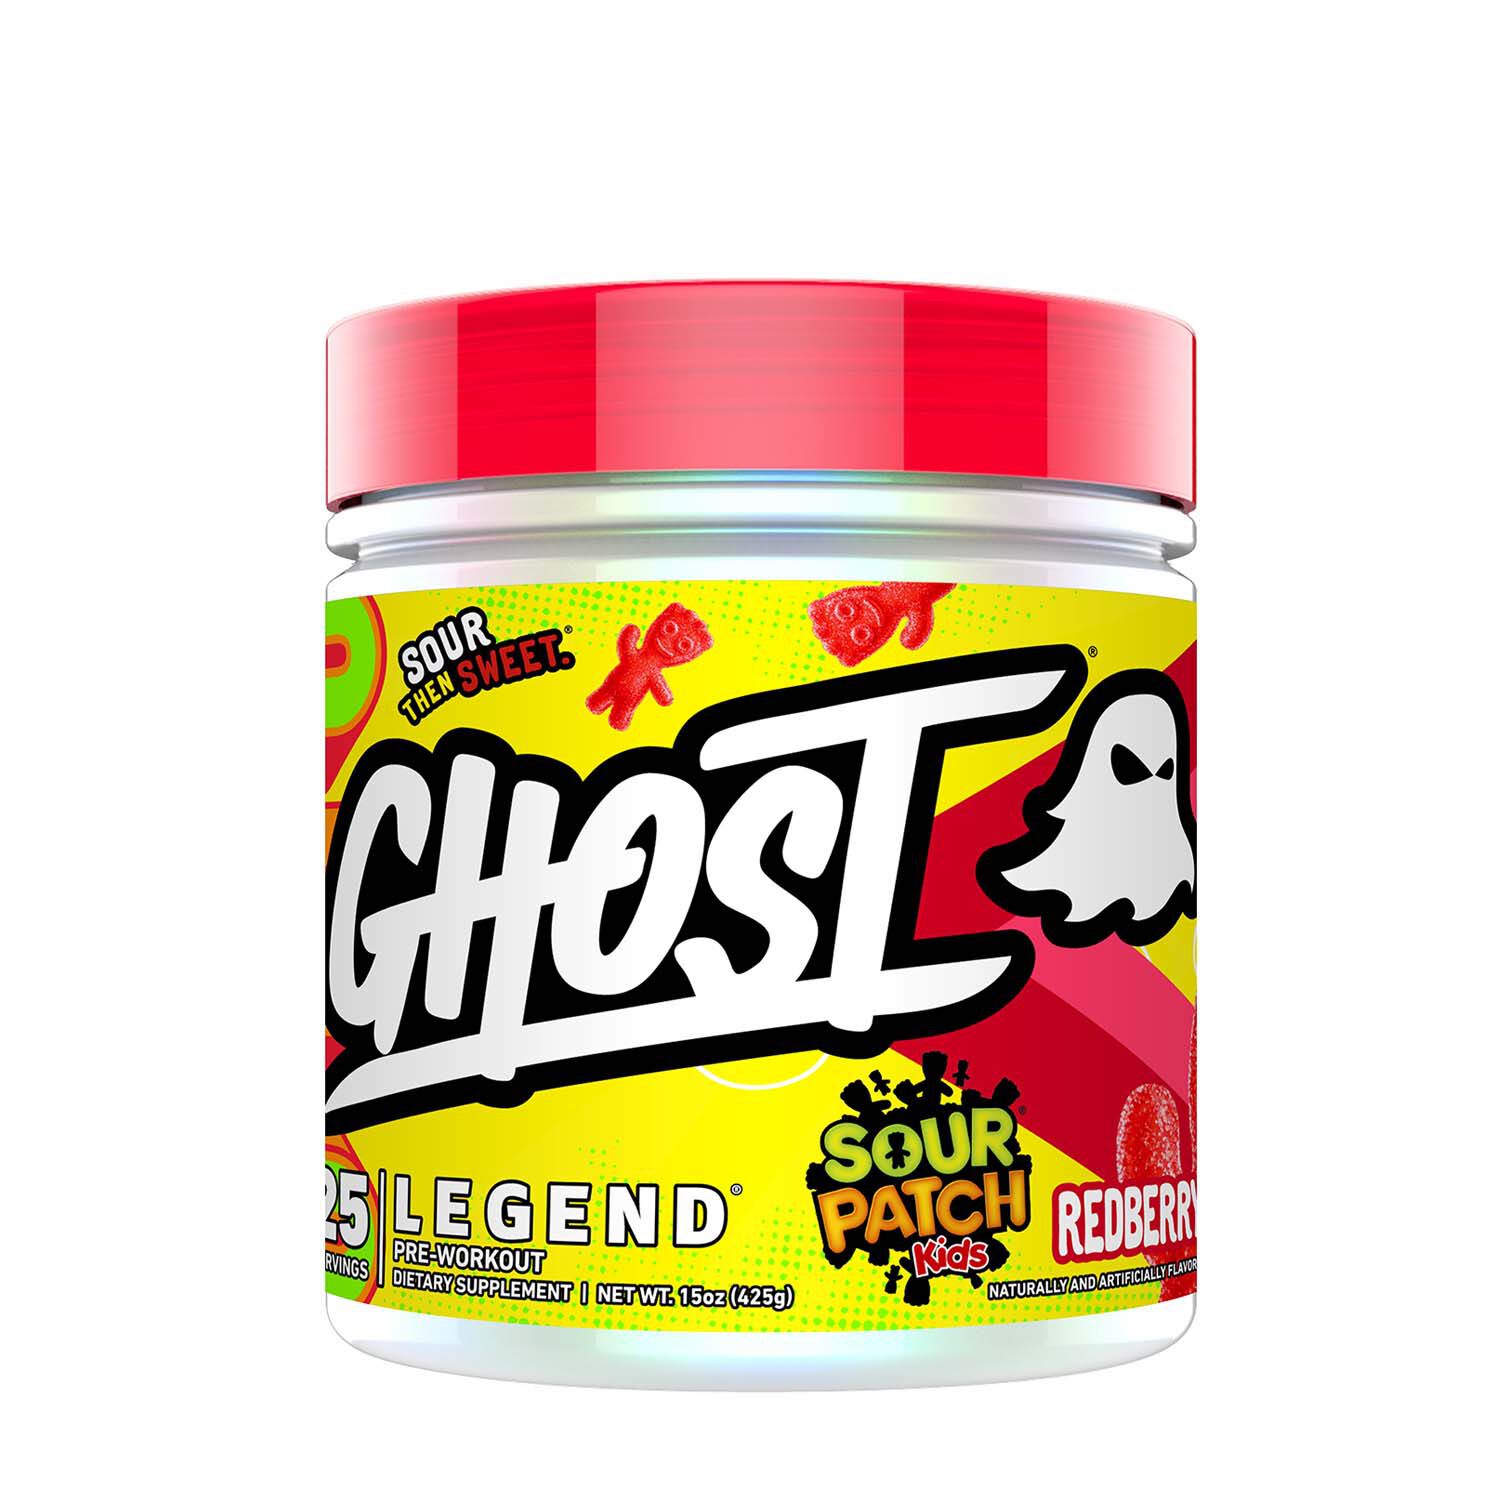 GHOST Legend Pre-Workout - Sour Patch Kids Redberry - 25 Servings